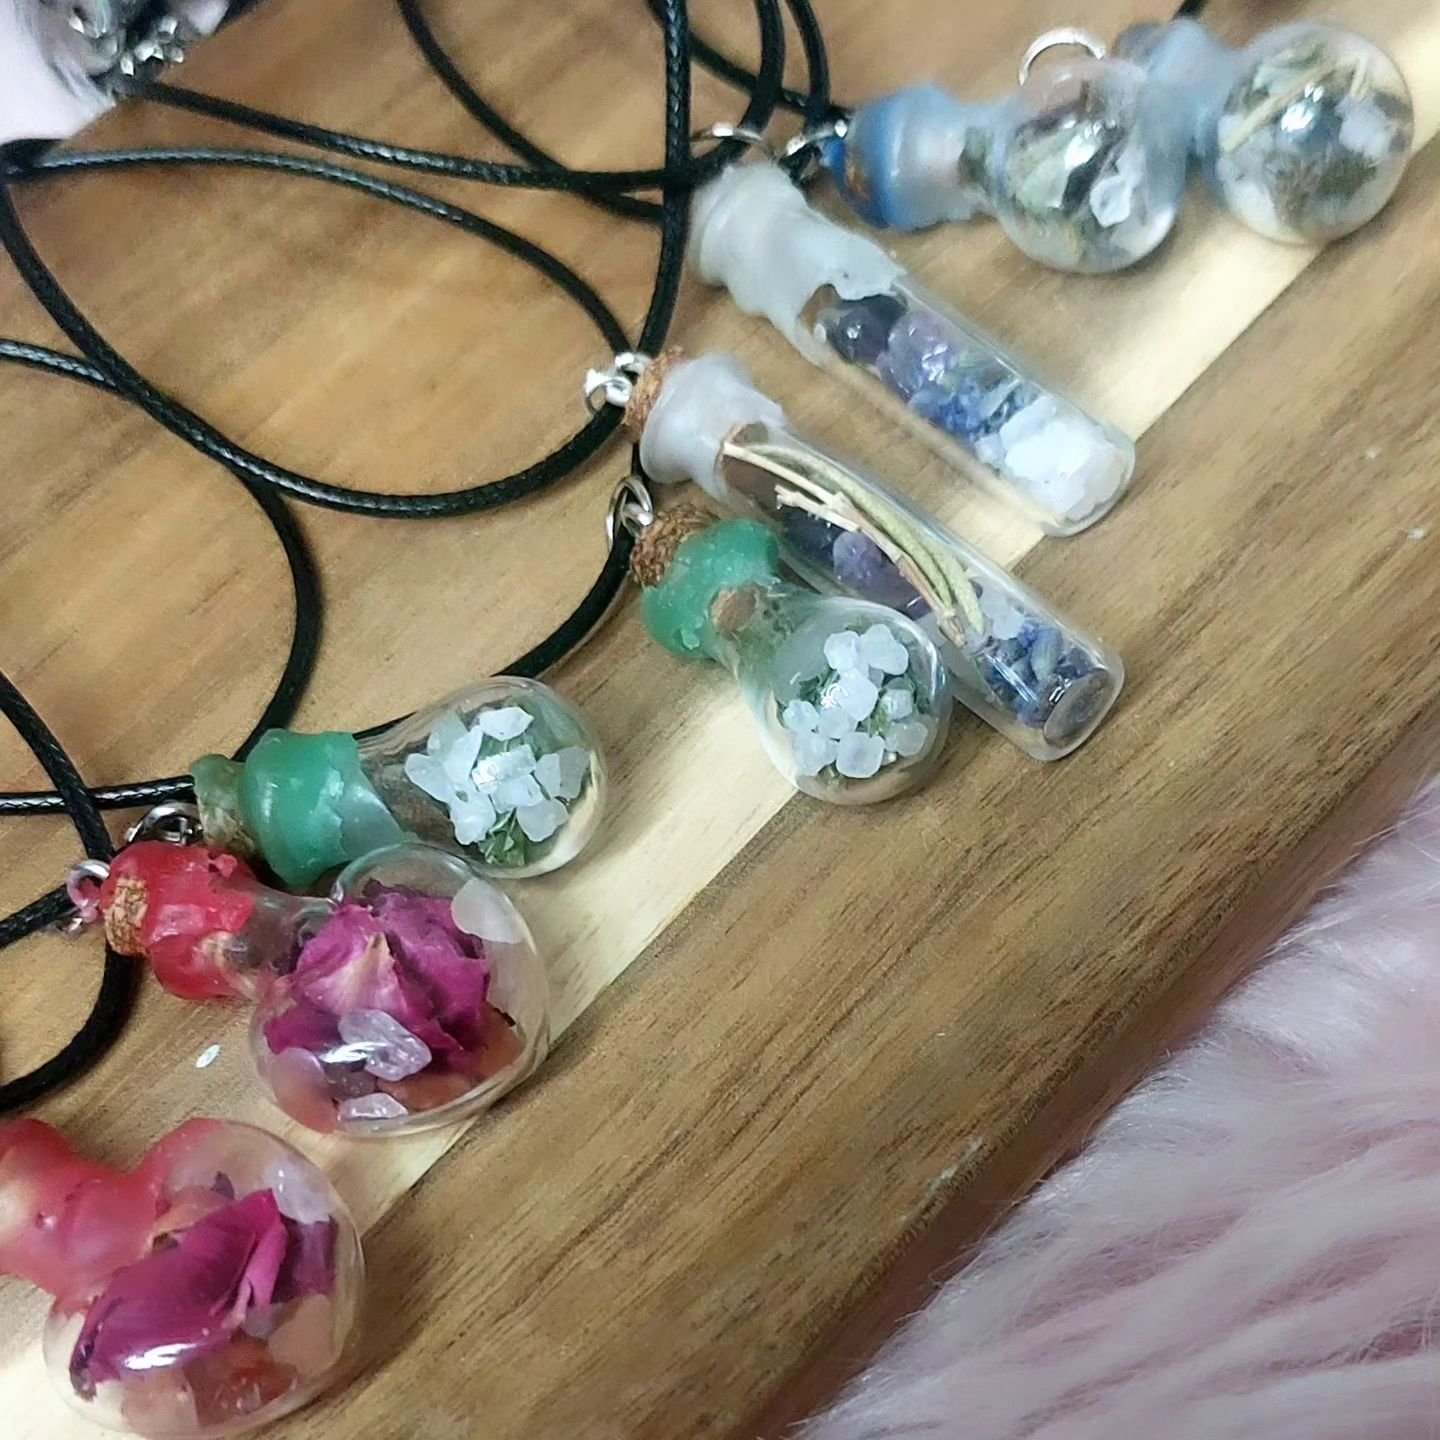 Available now on the website!! Spell jar pendants 
Anxiety 
Love 
Health
Protection 
Money
#witchesofinstagram #spellbottles #jewellery #smallbusiness